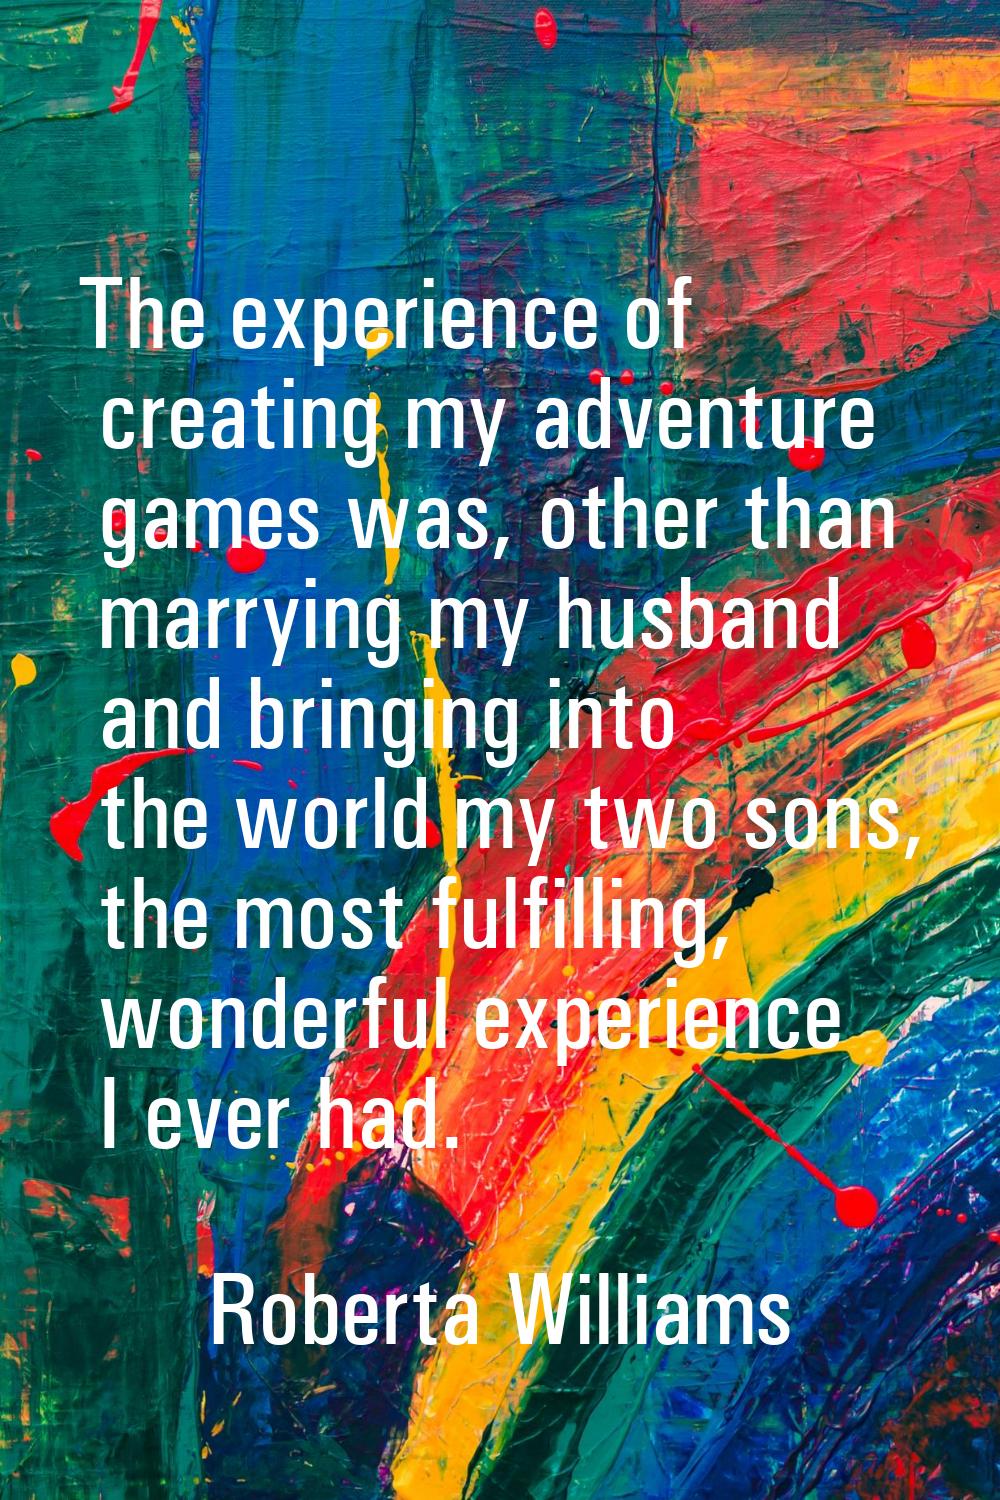 The experience of creating my adventure games was, other than marrying my husband and bringing into